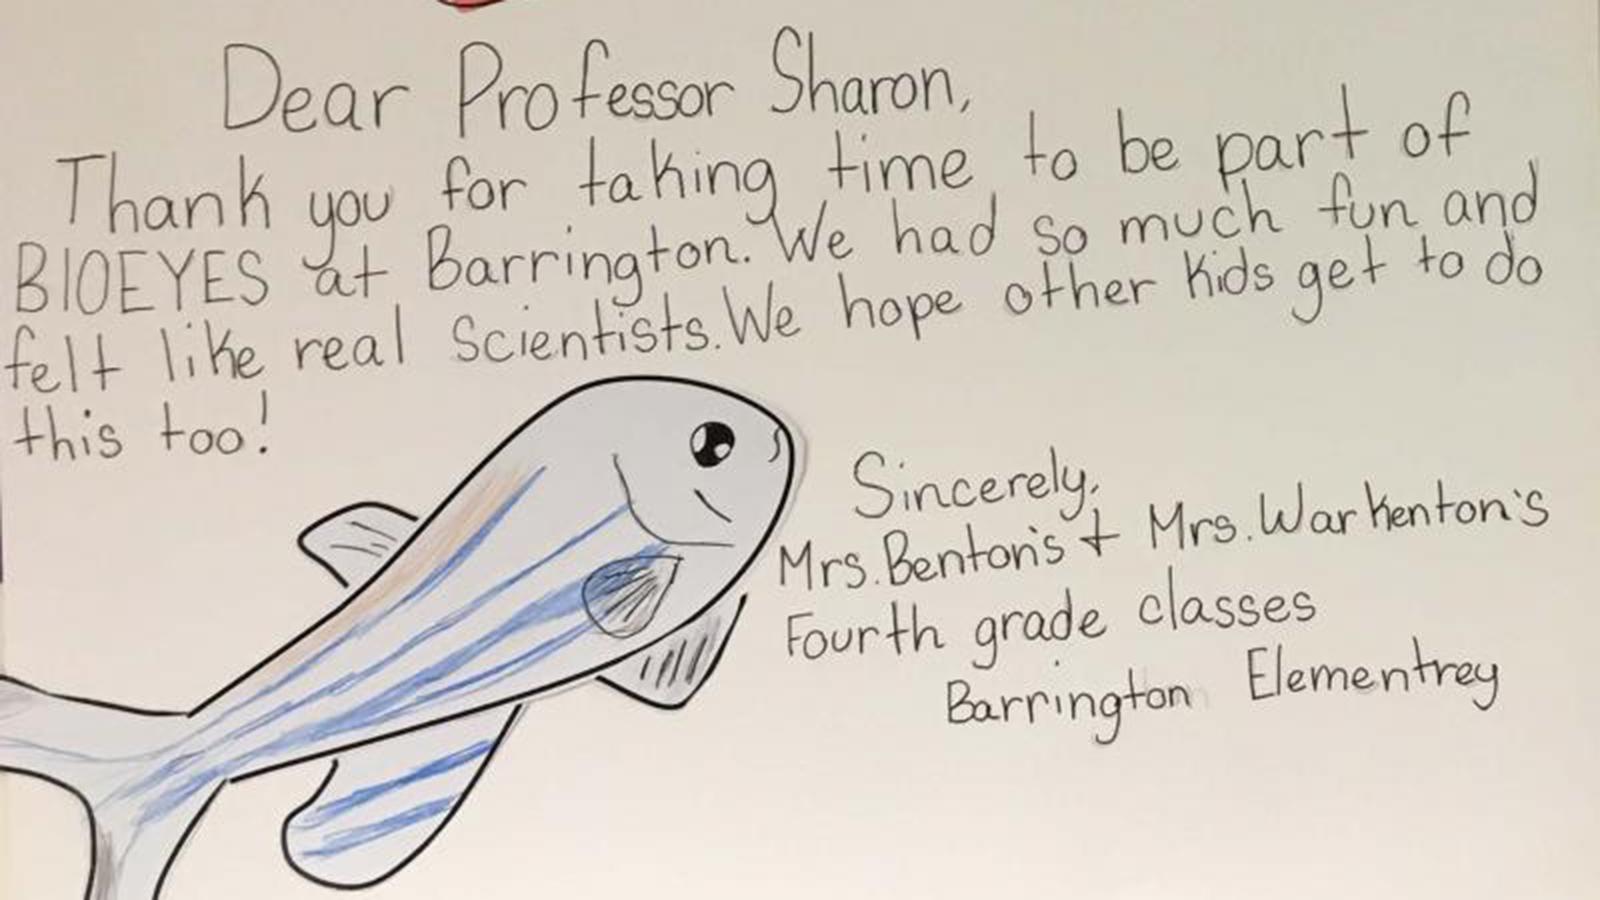 BioEYES thank you letter from Barrington Elementary School